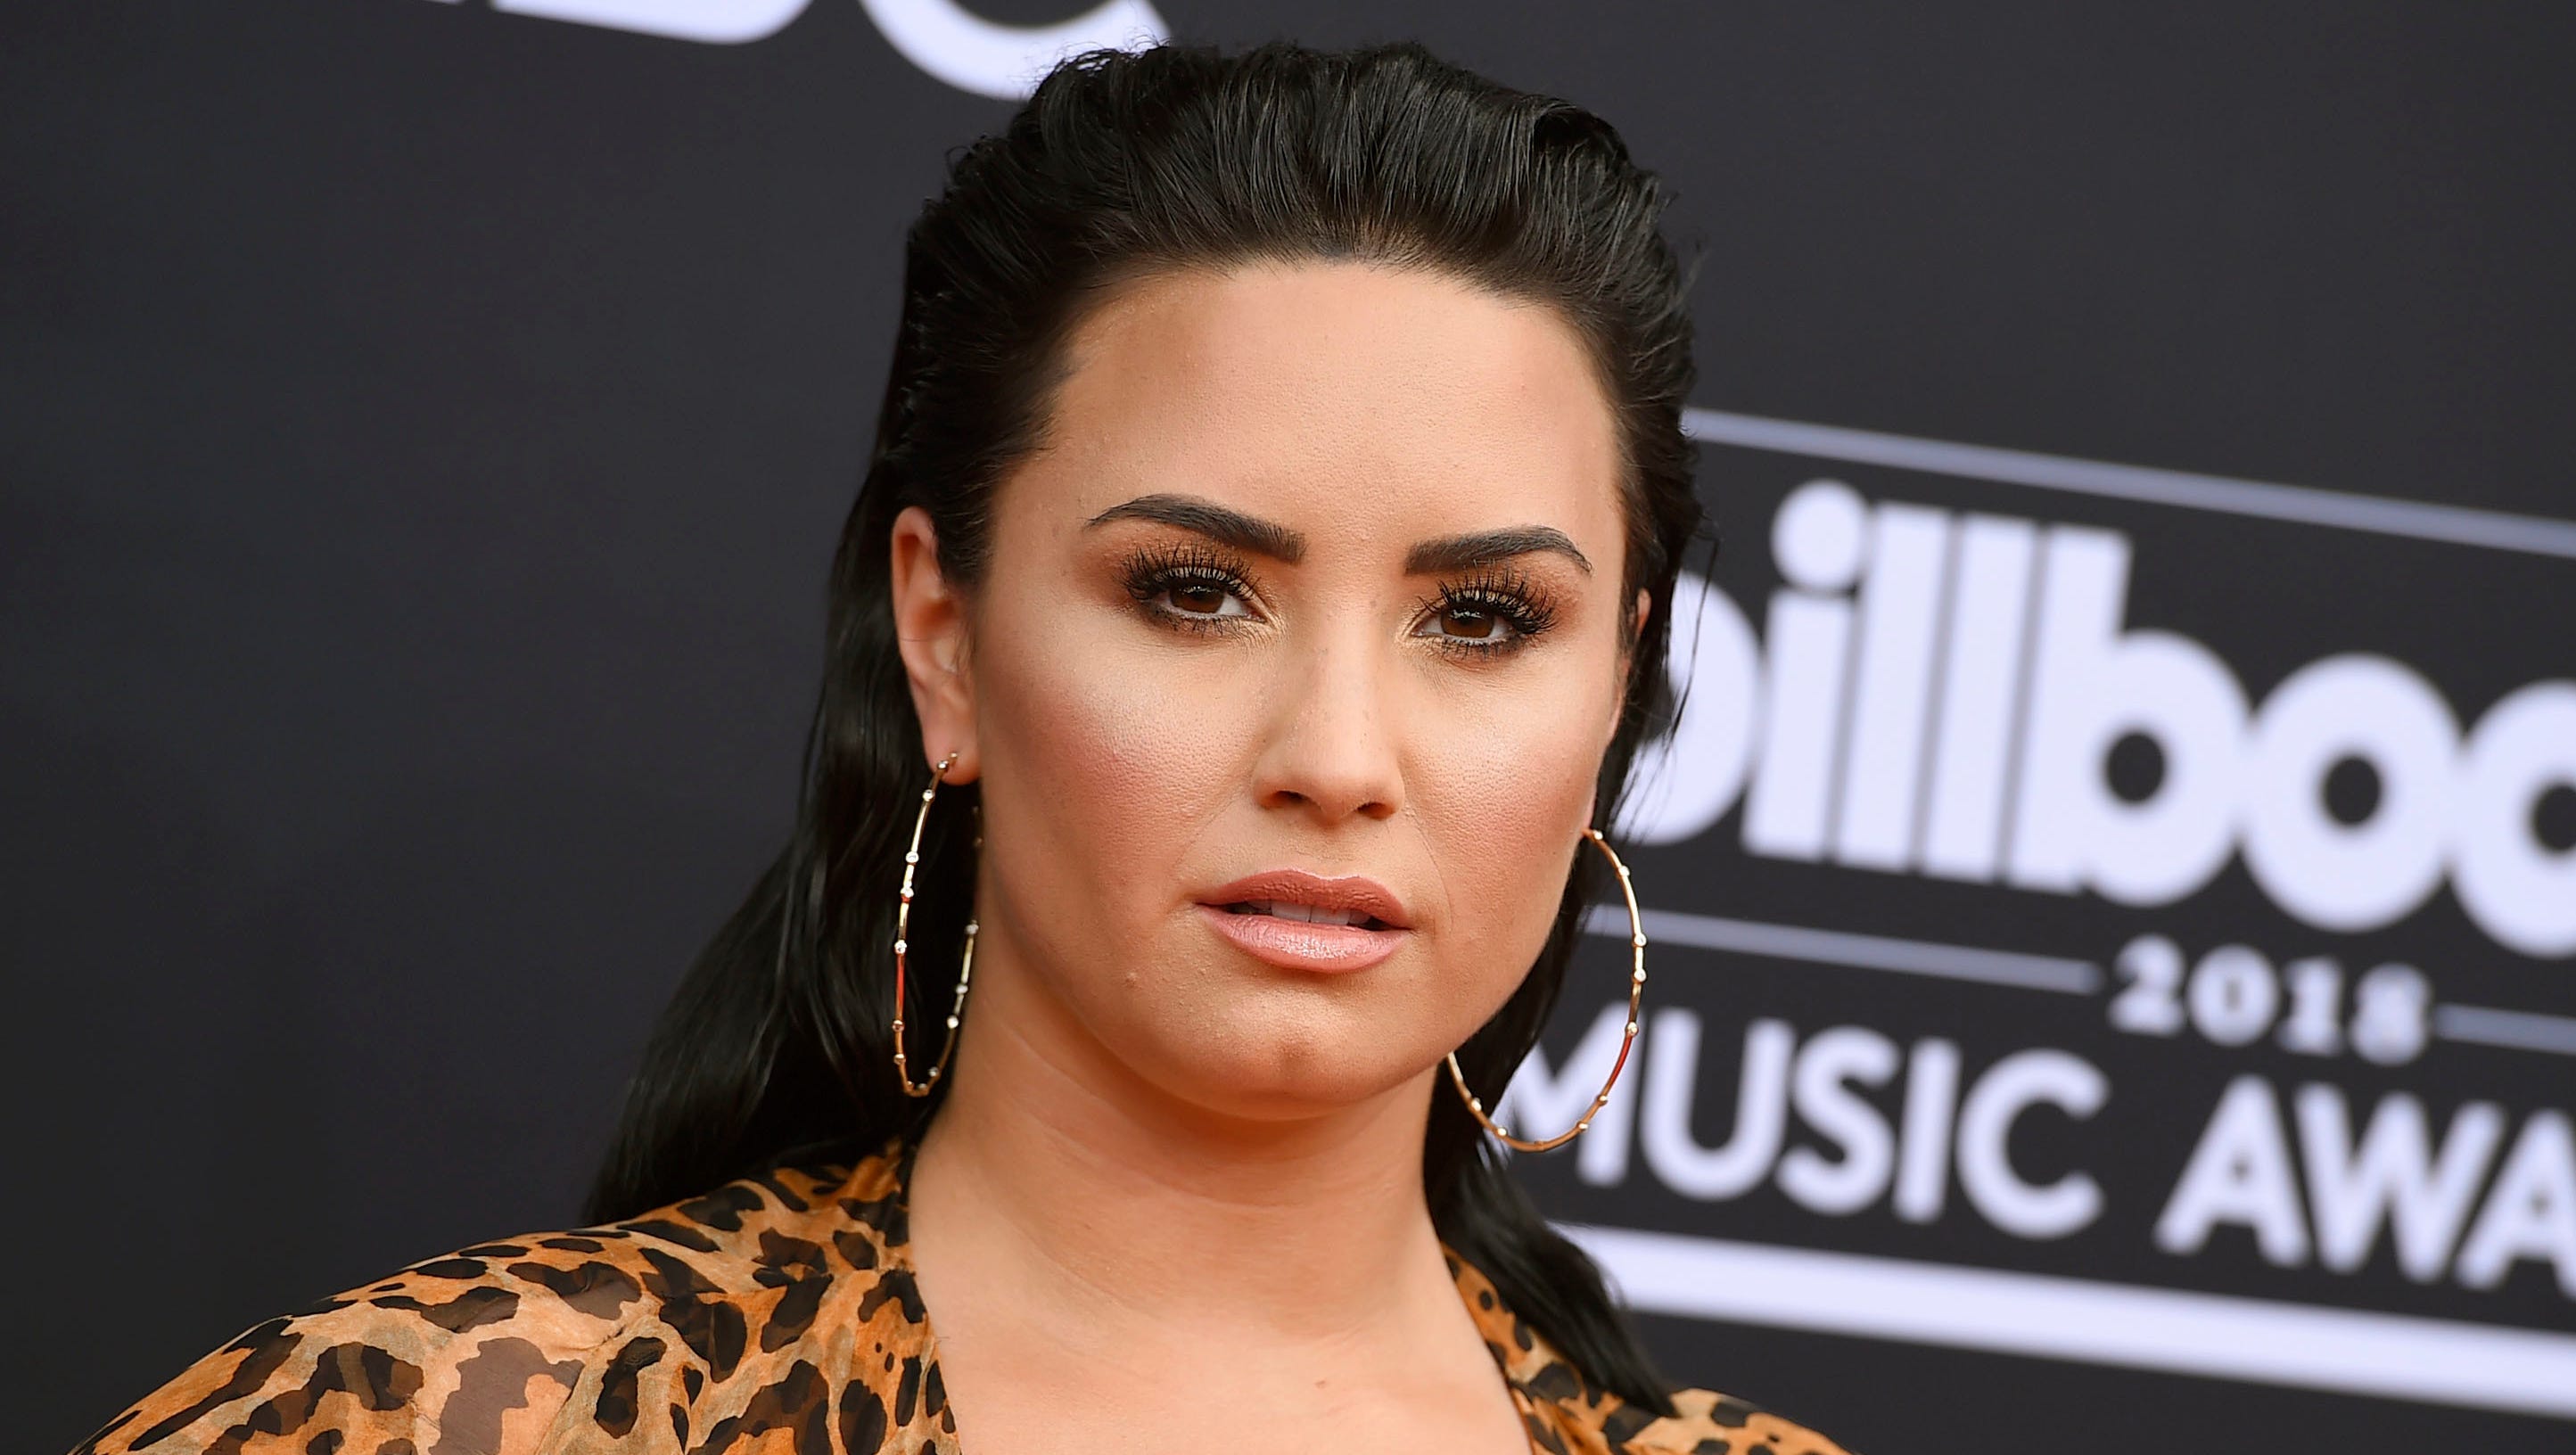 Rep Demi Lovato Is Awake And With Family After Possible Overdose